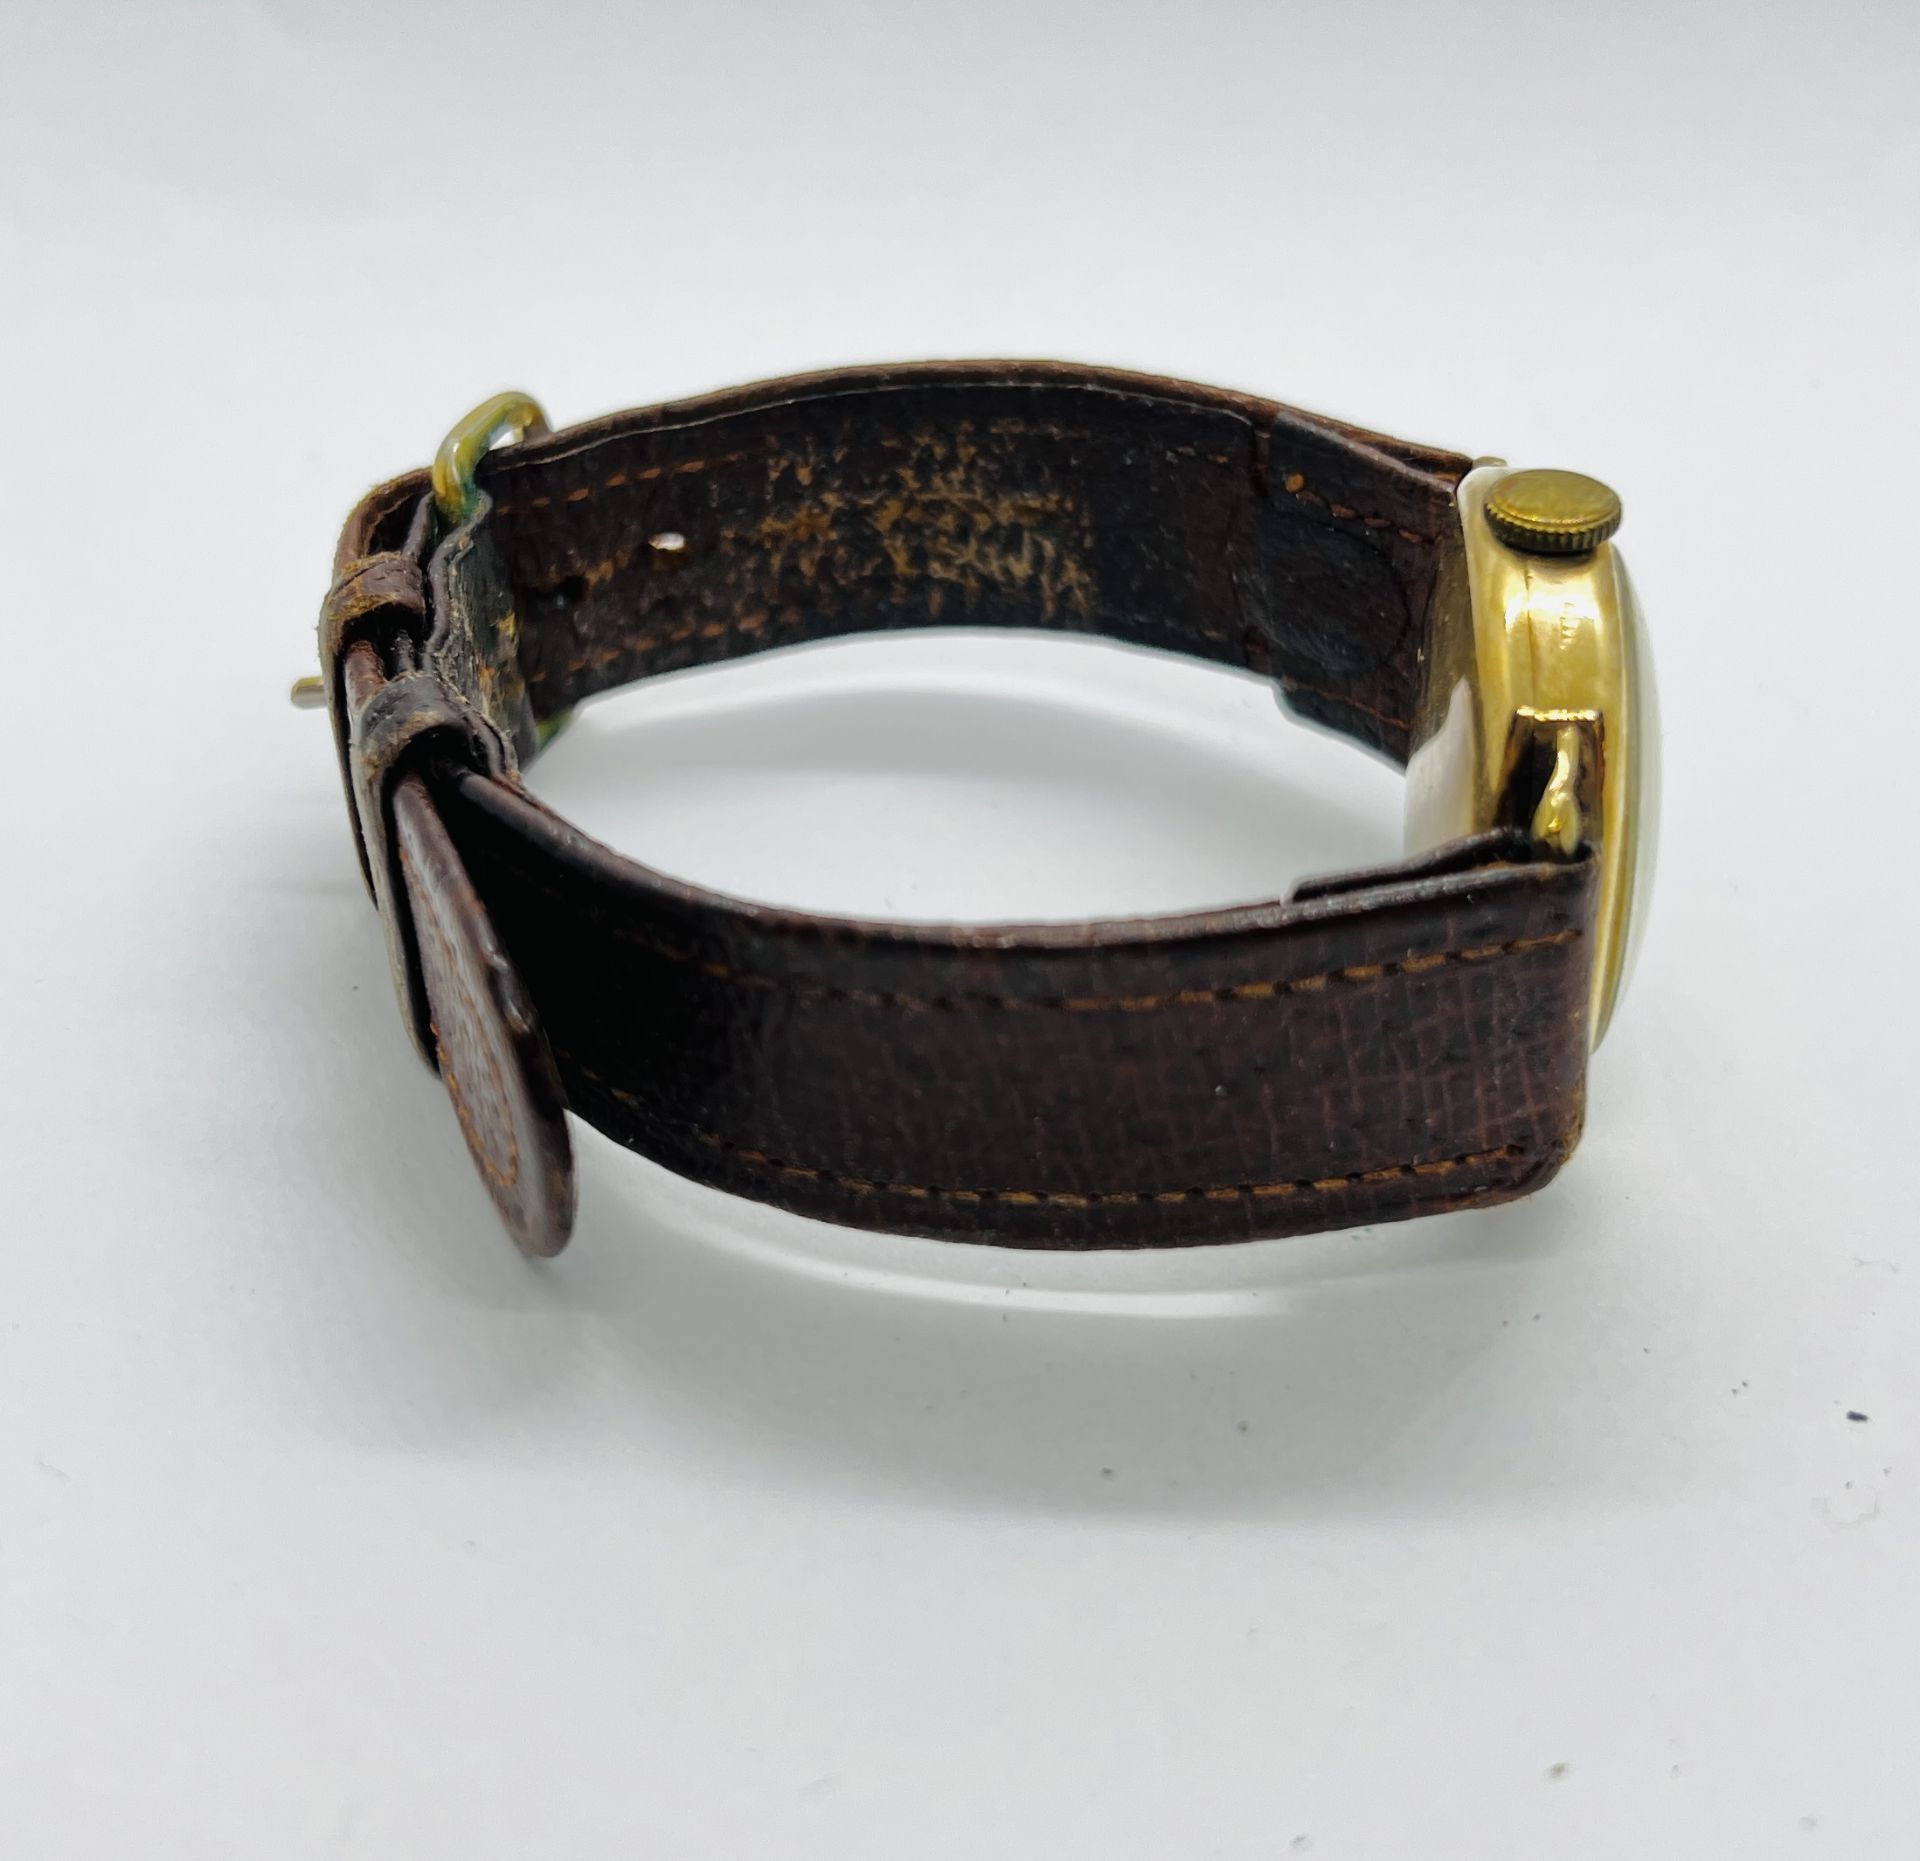 A VINTAGE 9CT GOLD CASED WRIST WATCH MARKED HERBERT ....... LTD MAGNO LUX ON A BROWN LEATHER STRAP. - Image 6 of 7